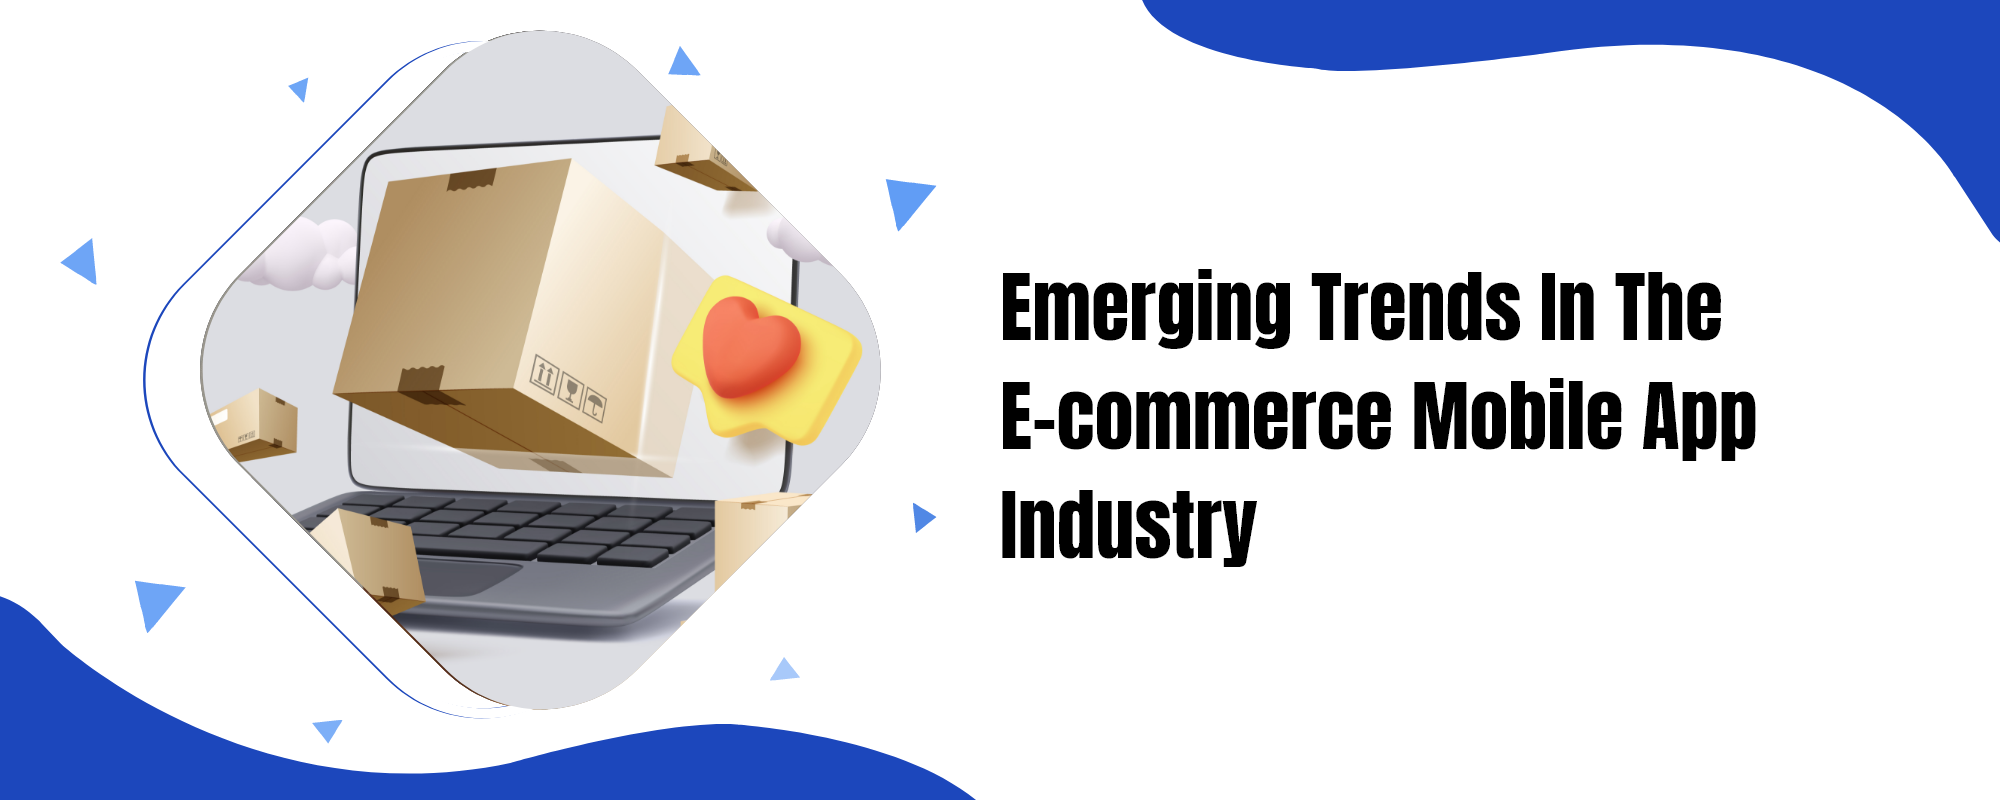 Emerging Trends In the E-commerce Mobile App Industry